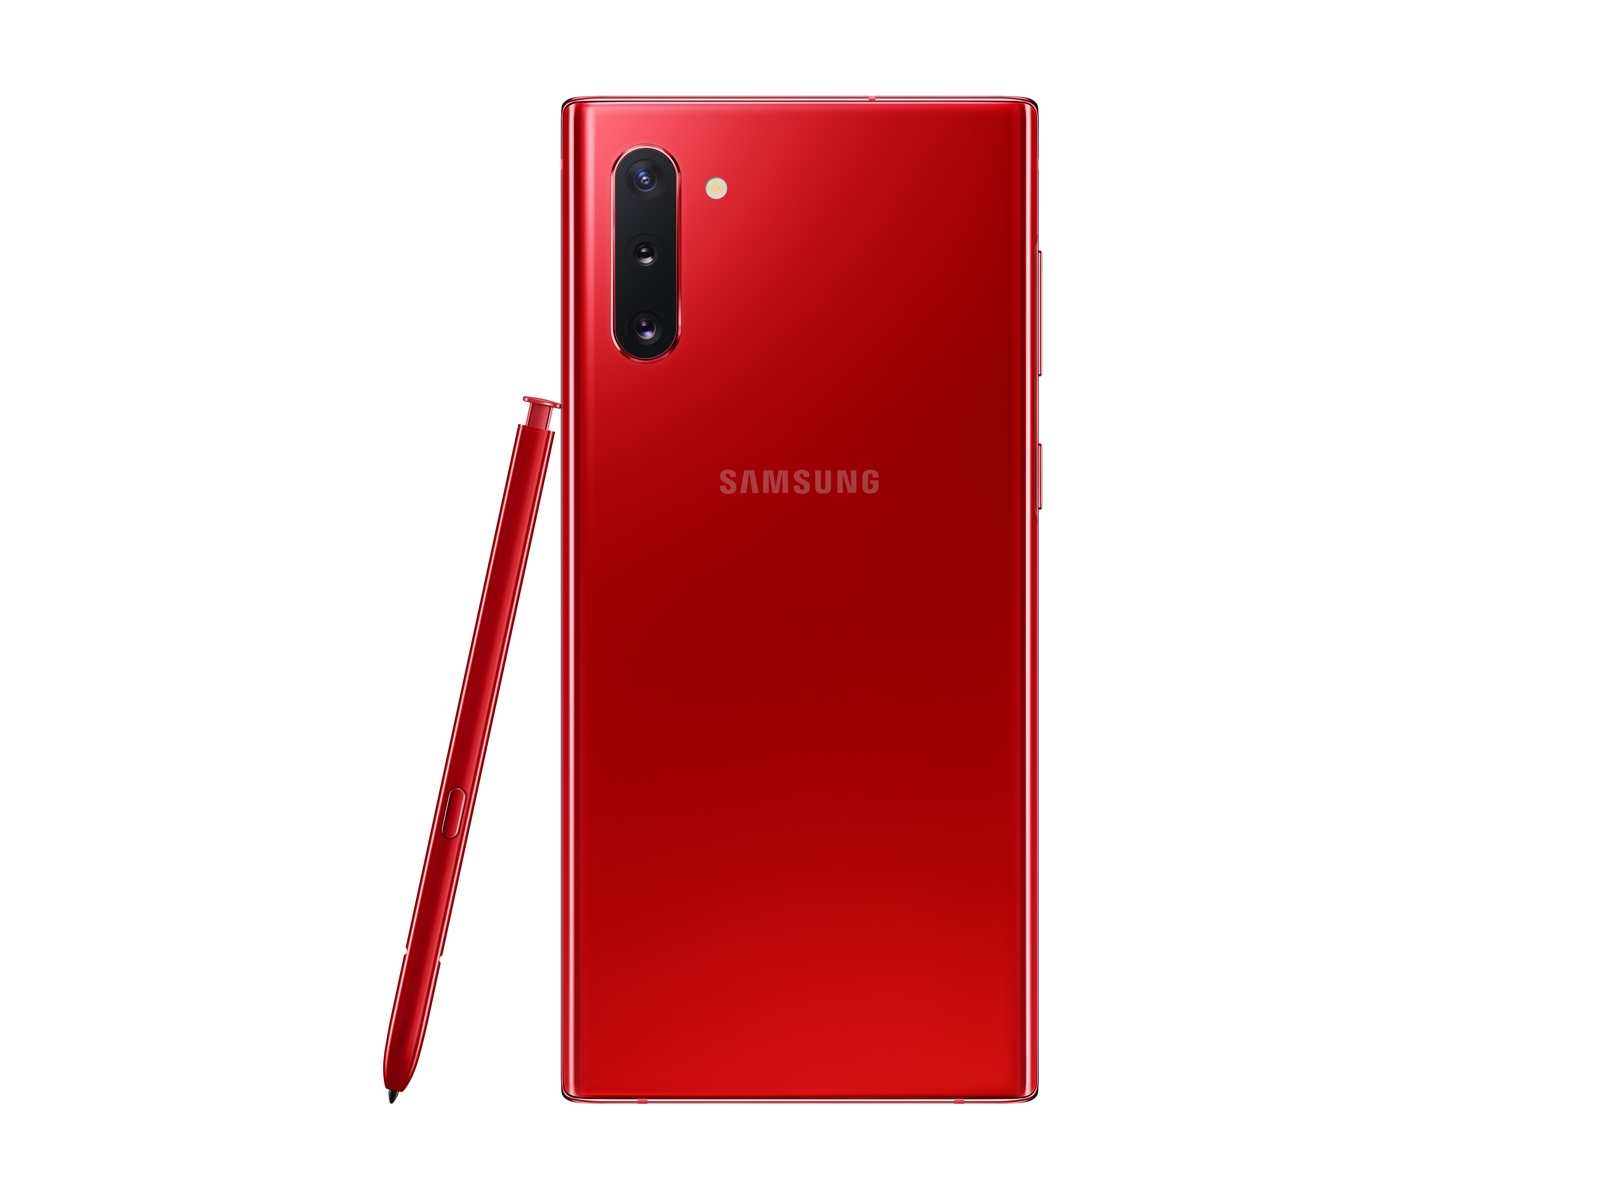 Samsung Galaxy Note 10 Smartphone - Dolby